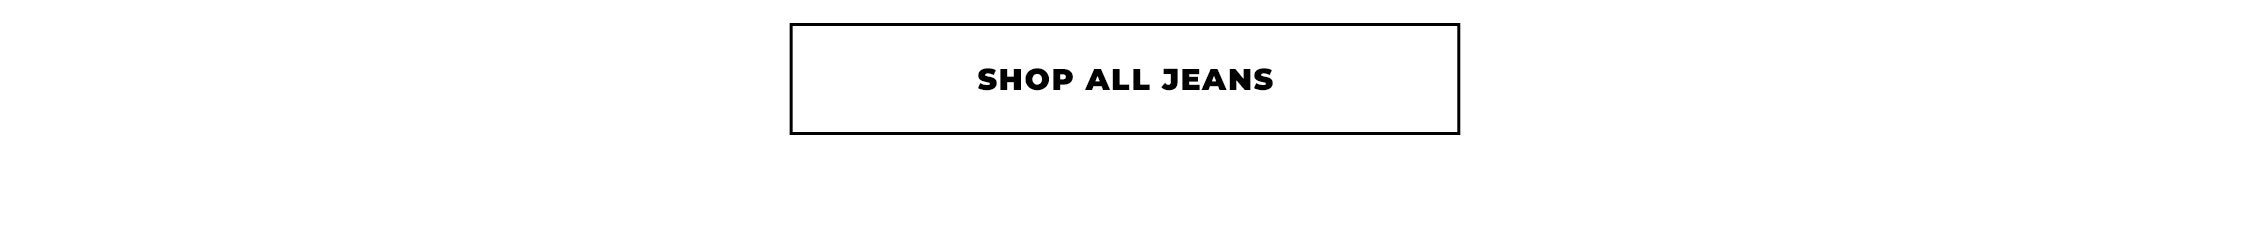 Shop All Jeans